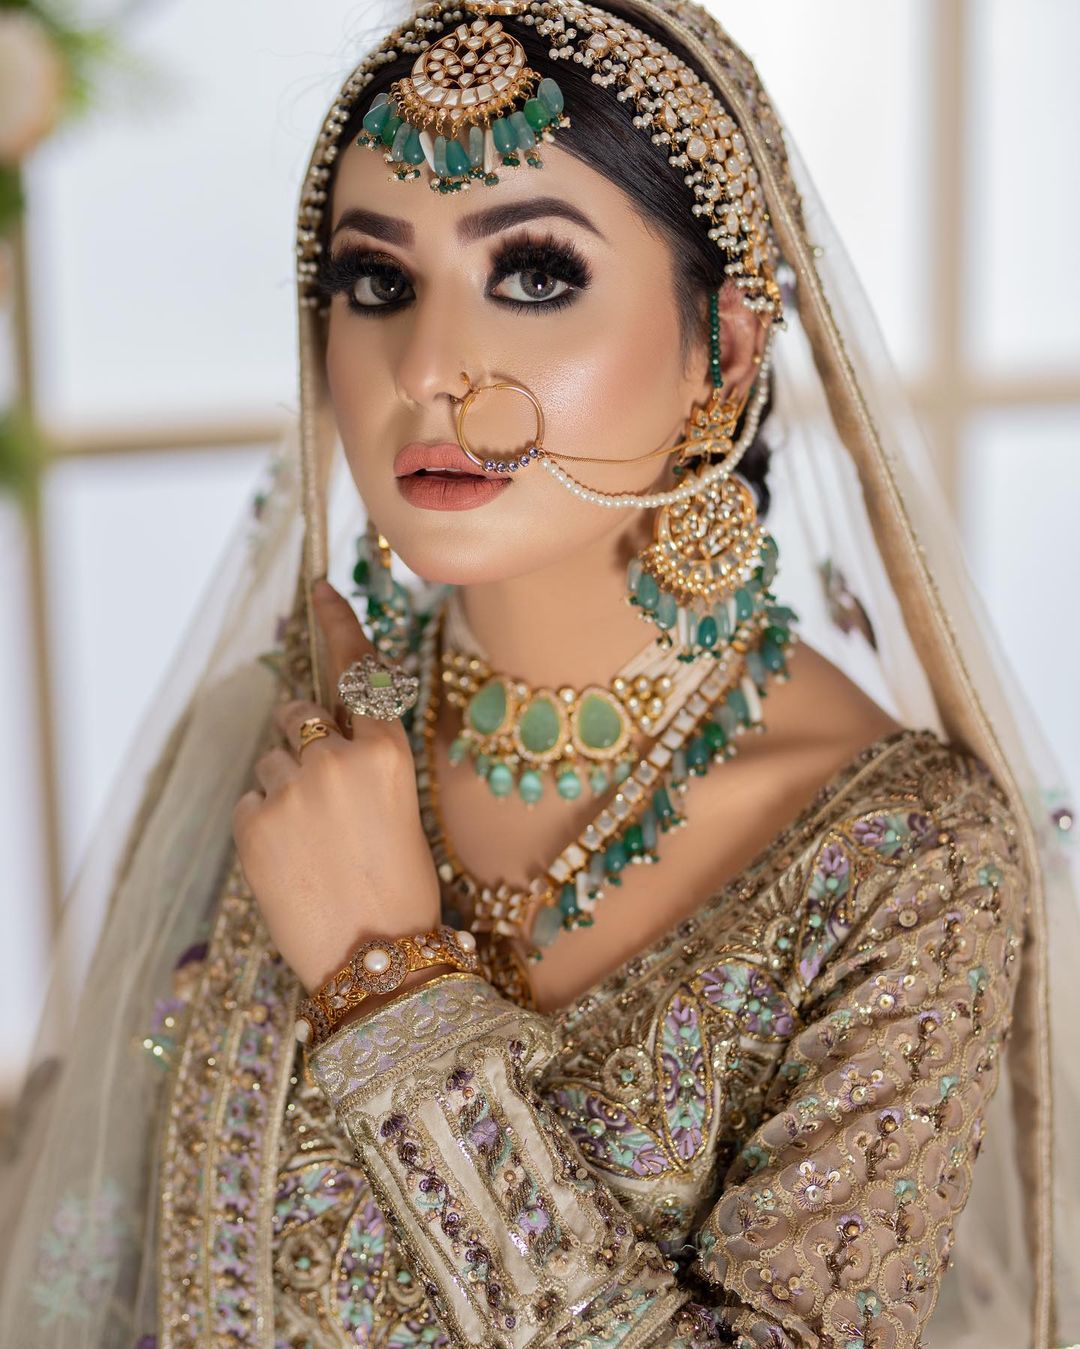 A Simple And Rich Look For The Bride